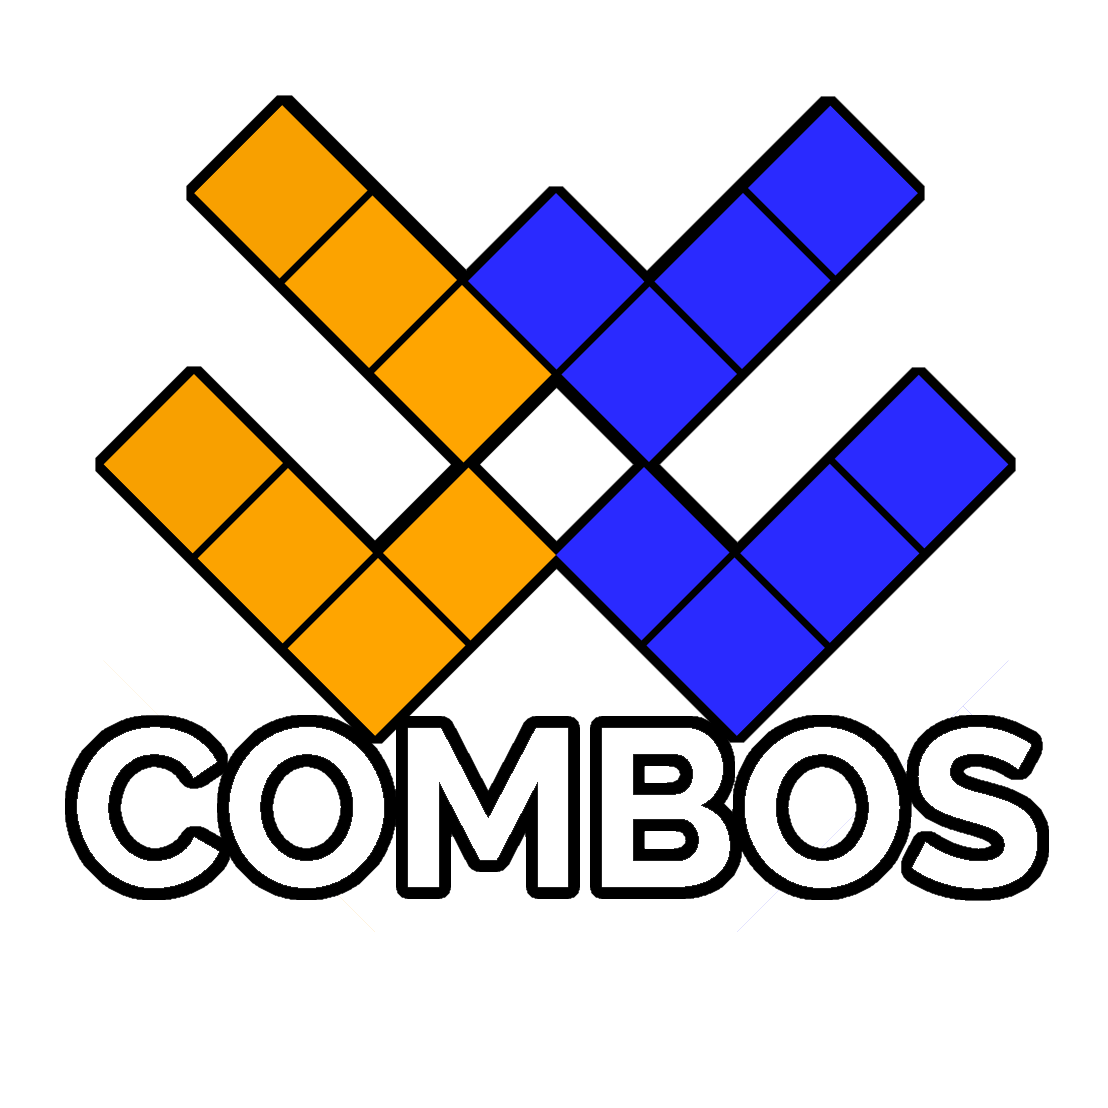 Combos Logo - Worldwide Combos, Free And Competitive Block Stacking Game